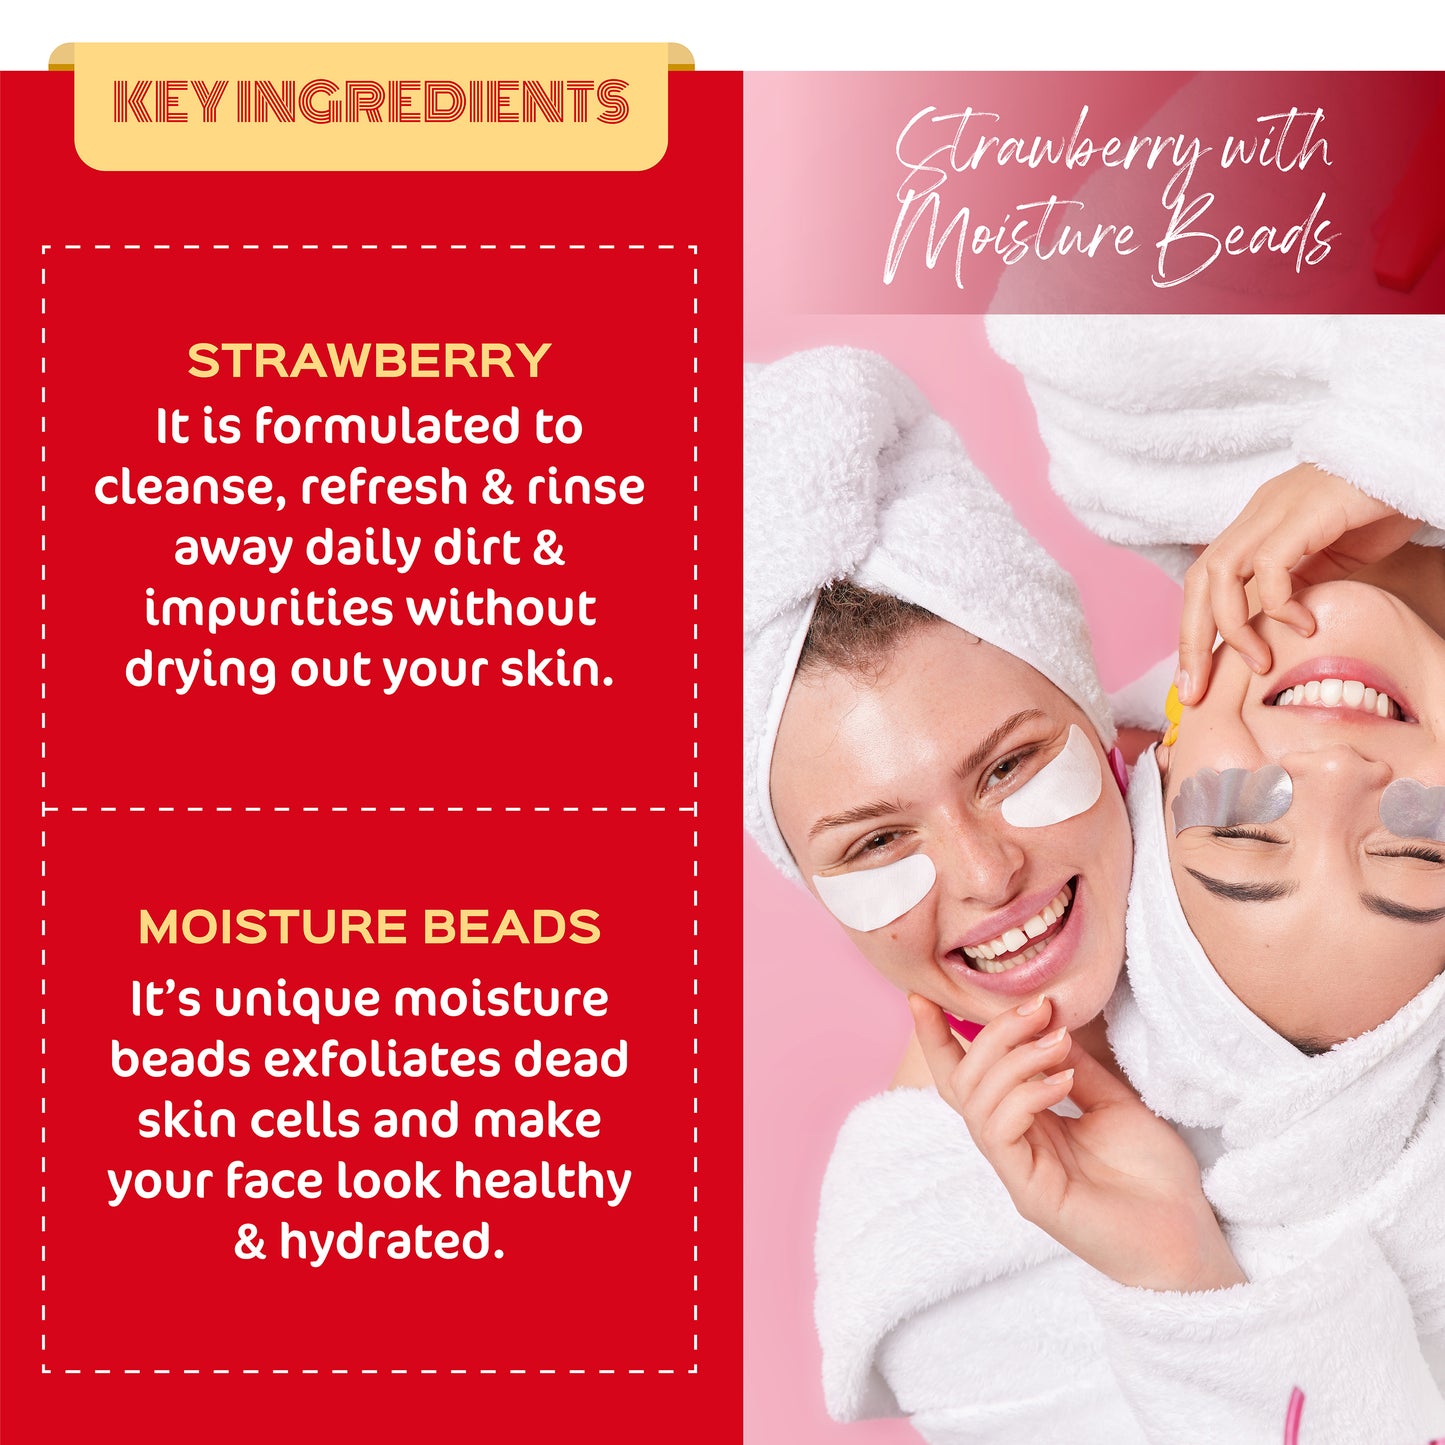 Key ingredients of glow up strawberry face wash